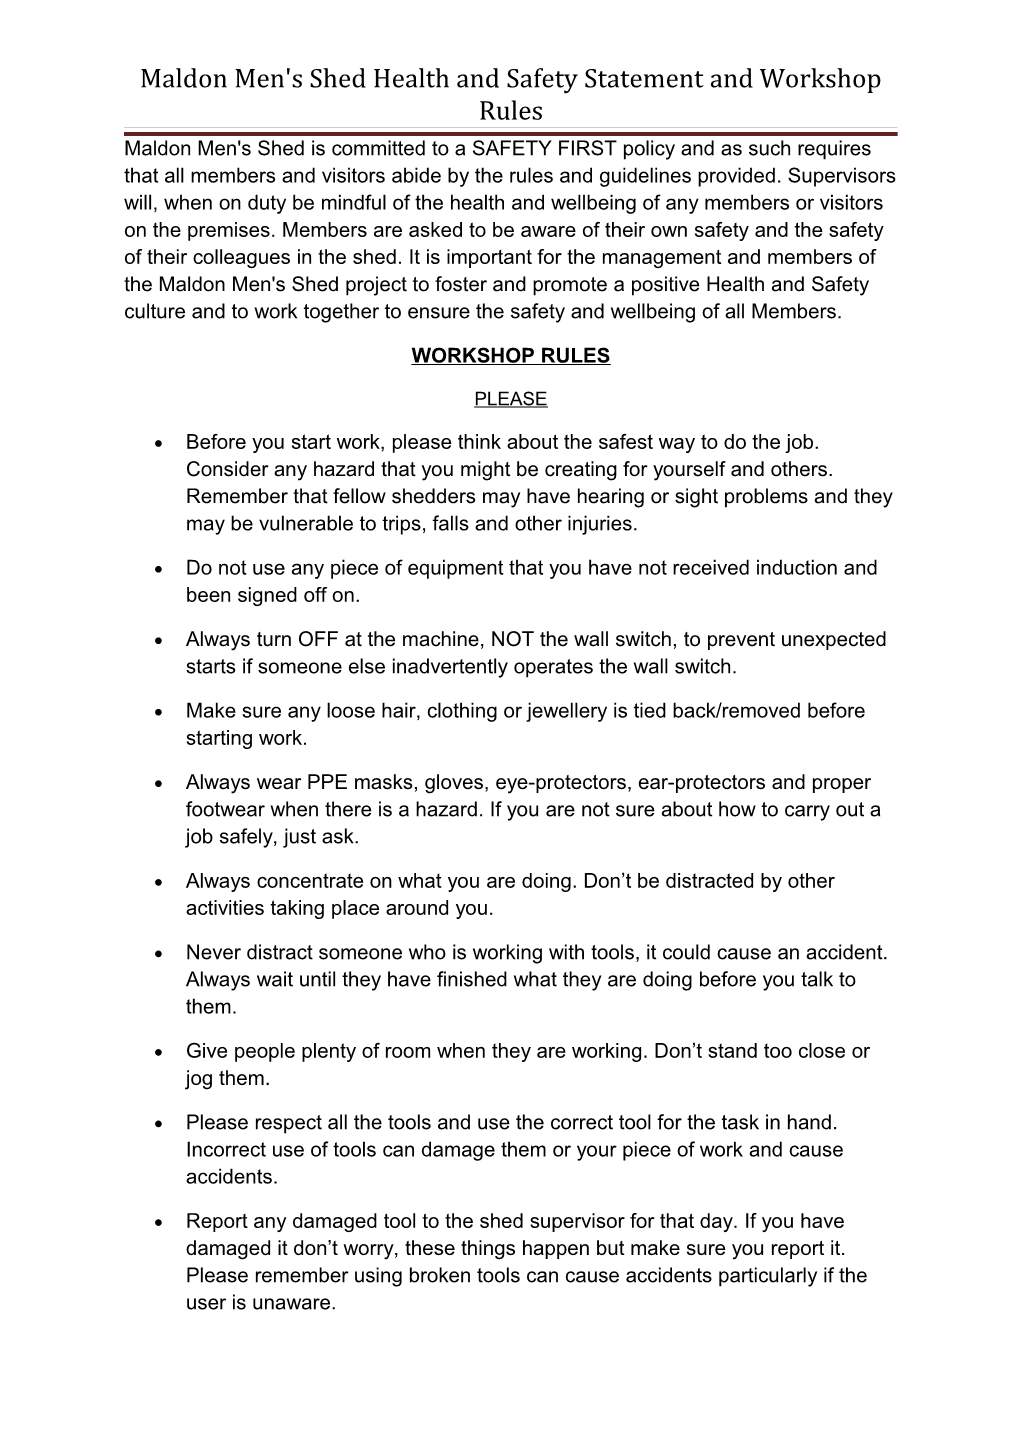 Maldon Men's Shed Health and Safety Statement and Workshop Rules